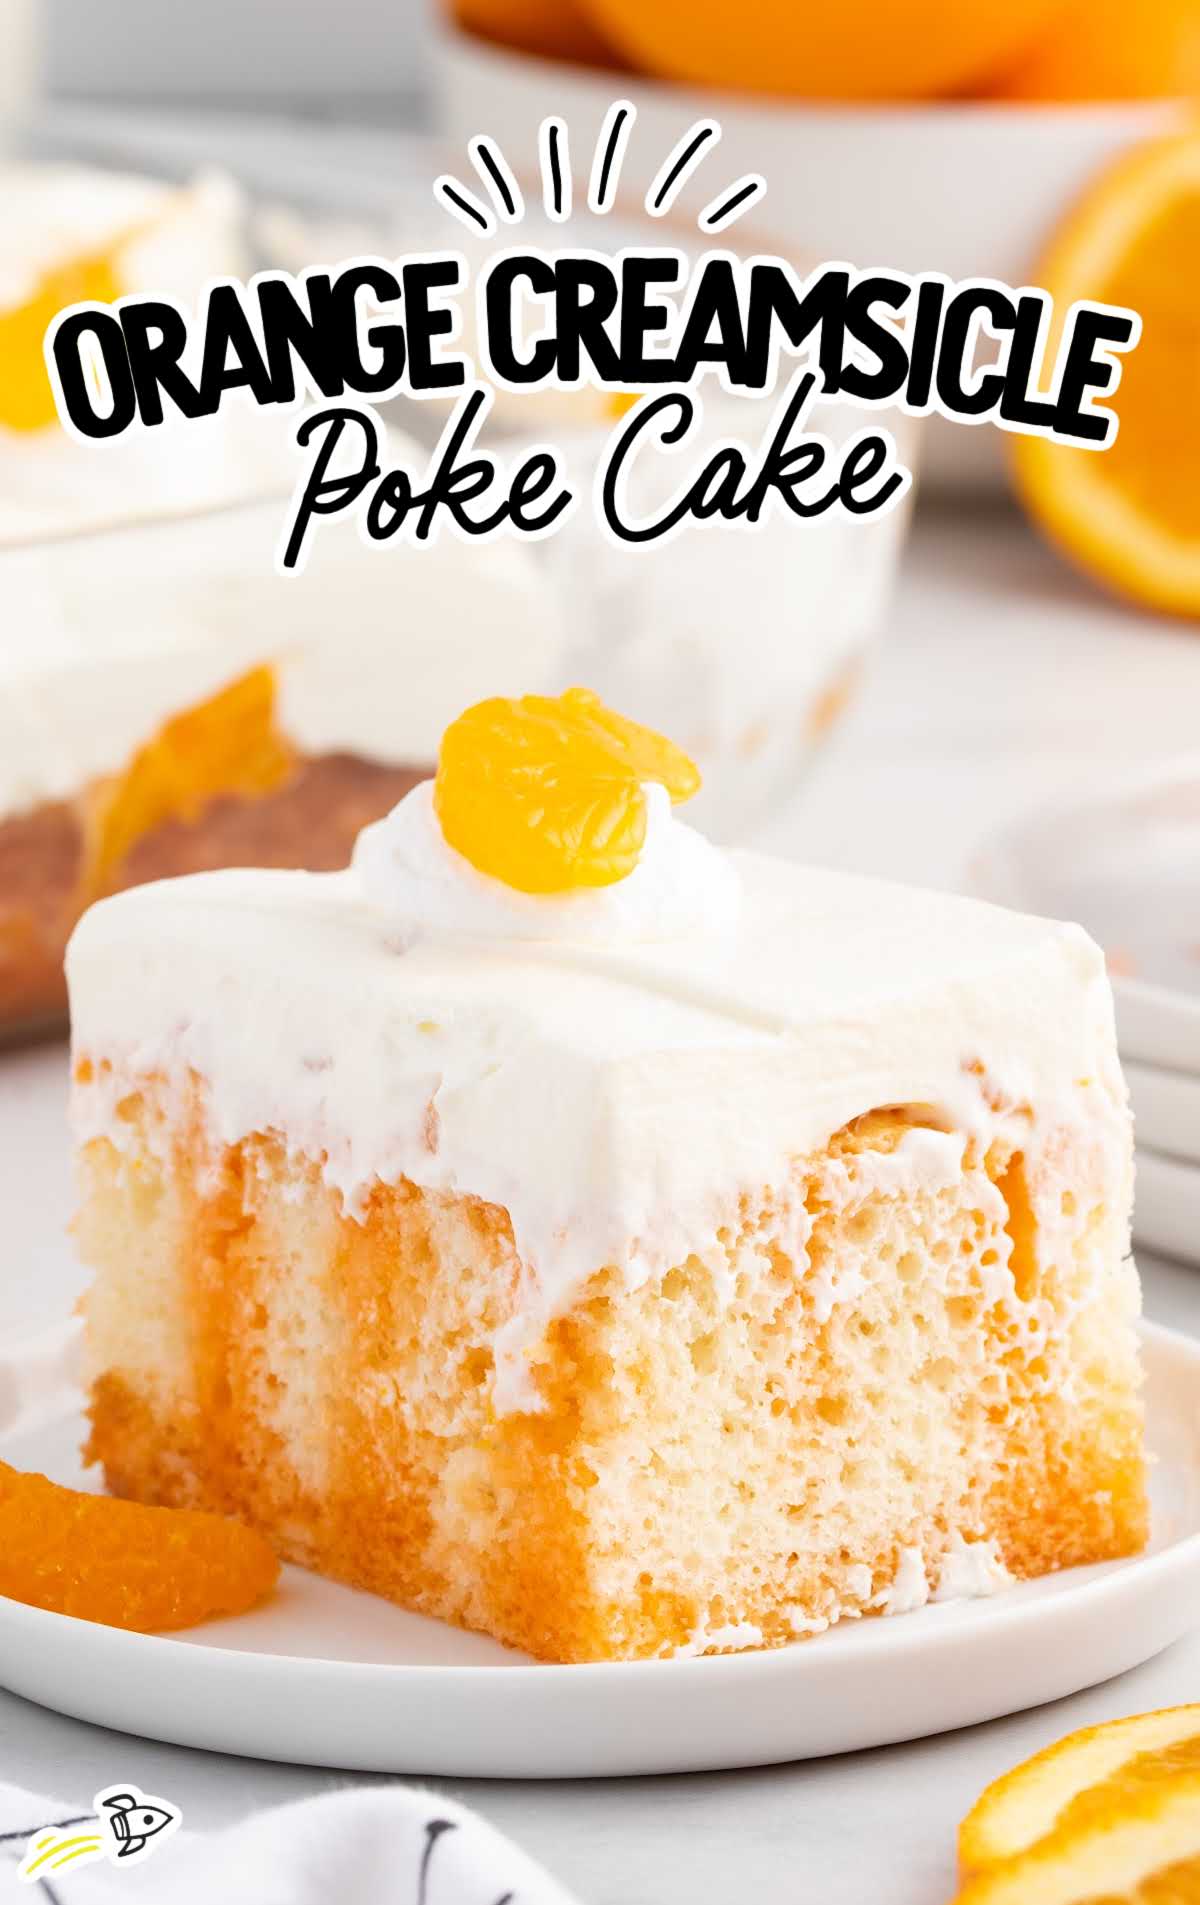 a close up shot of a slice of Orange Creamsicle Poke Cake on a plate topped with a mandarin